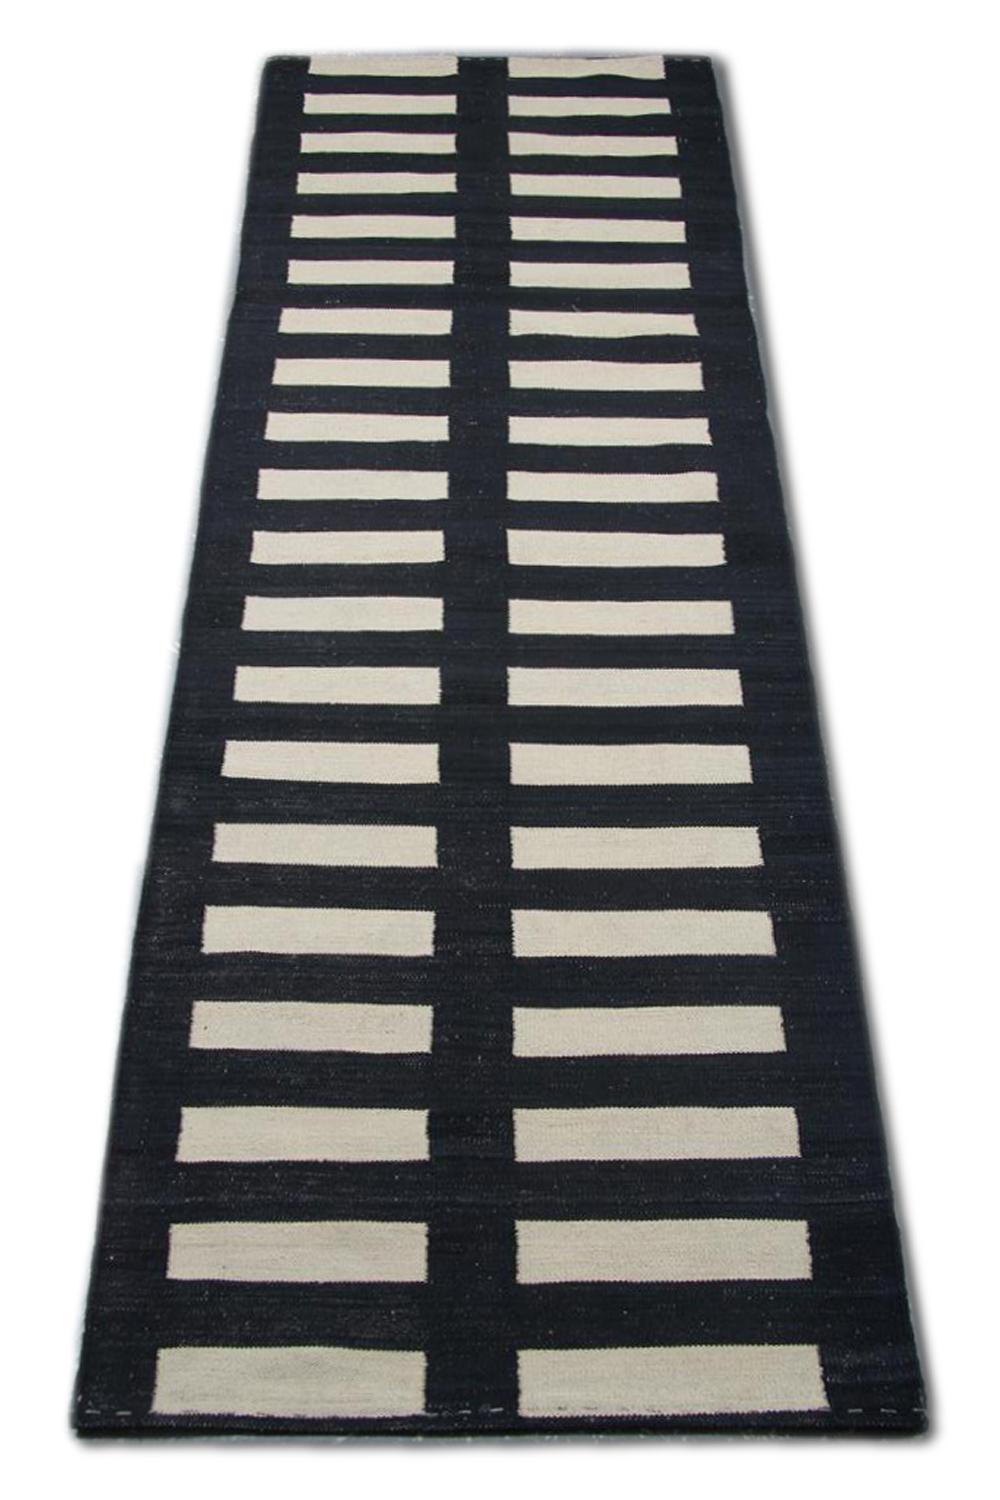 This striped carpet runner is a kind of Kilims indicating a particular flat-weave runner rug. It has been handmade stair runner in Afghanistan with the best wool and cotton by skilful weavers. Also, the high materials are of the highest quality wool